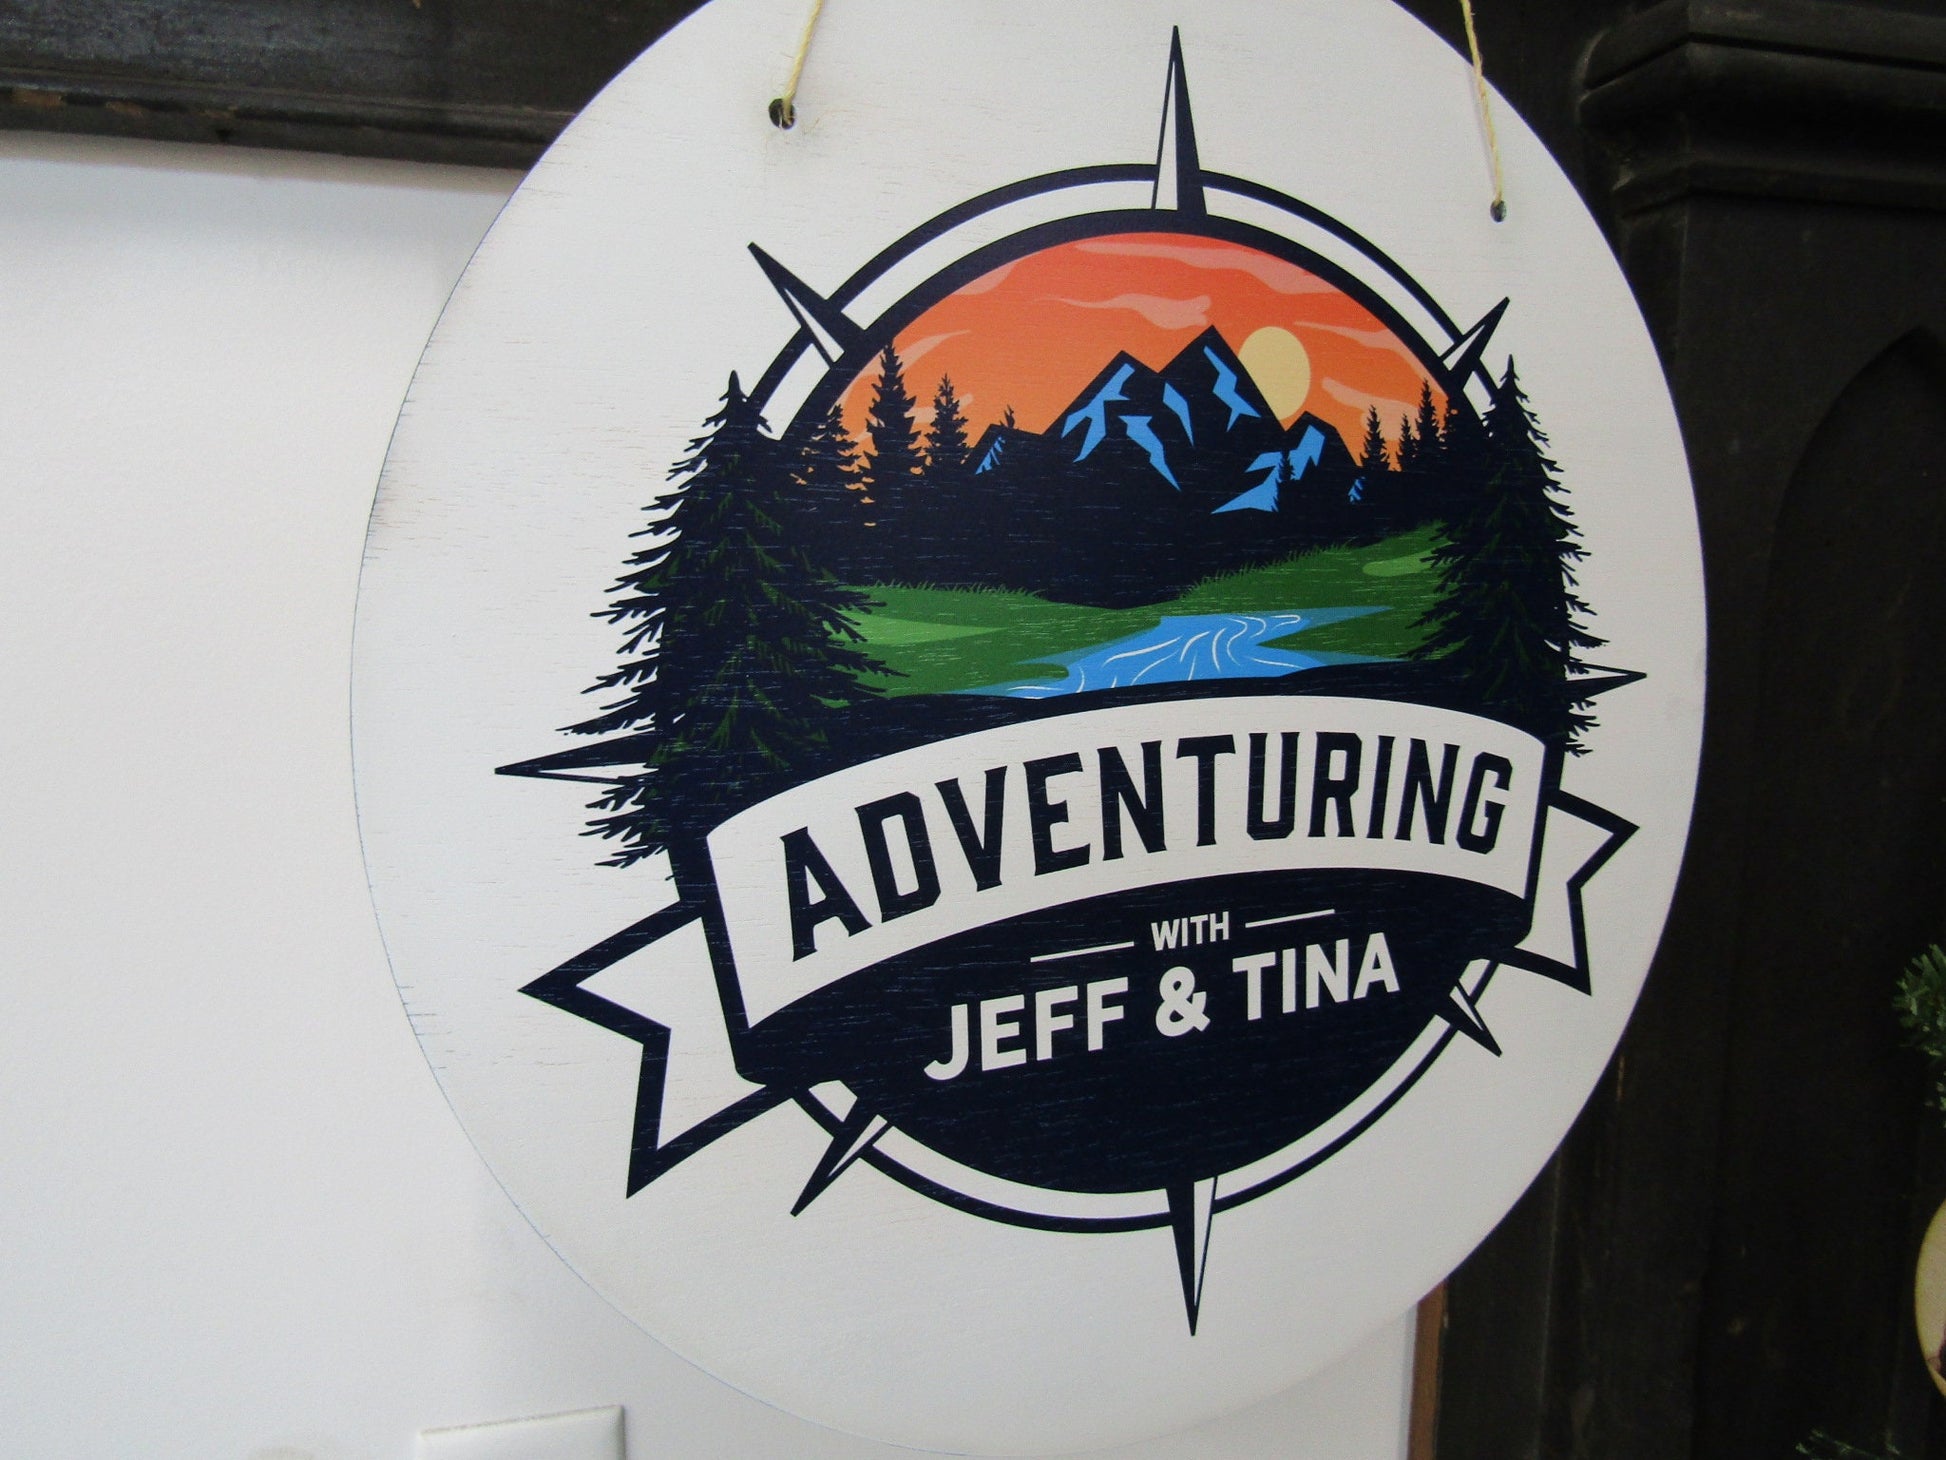 Blogger Youtuber Adventuring With Compass Wilderness Outdoors Camping Rv Hanging Sign Personalized Custom Round Circle Signage Gift Vanlife